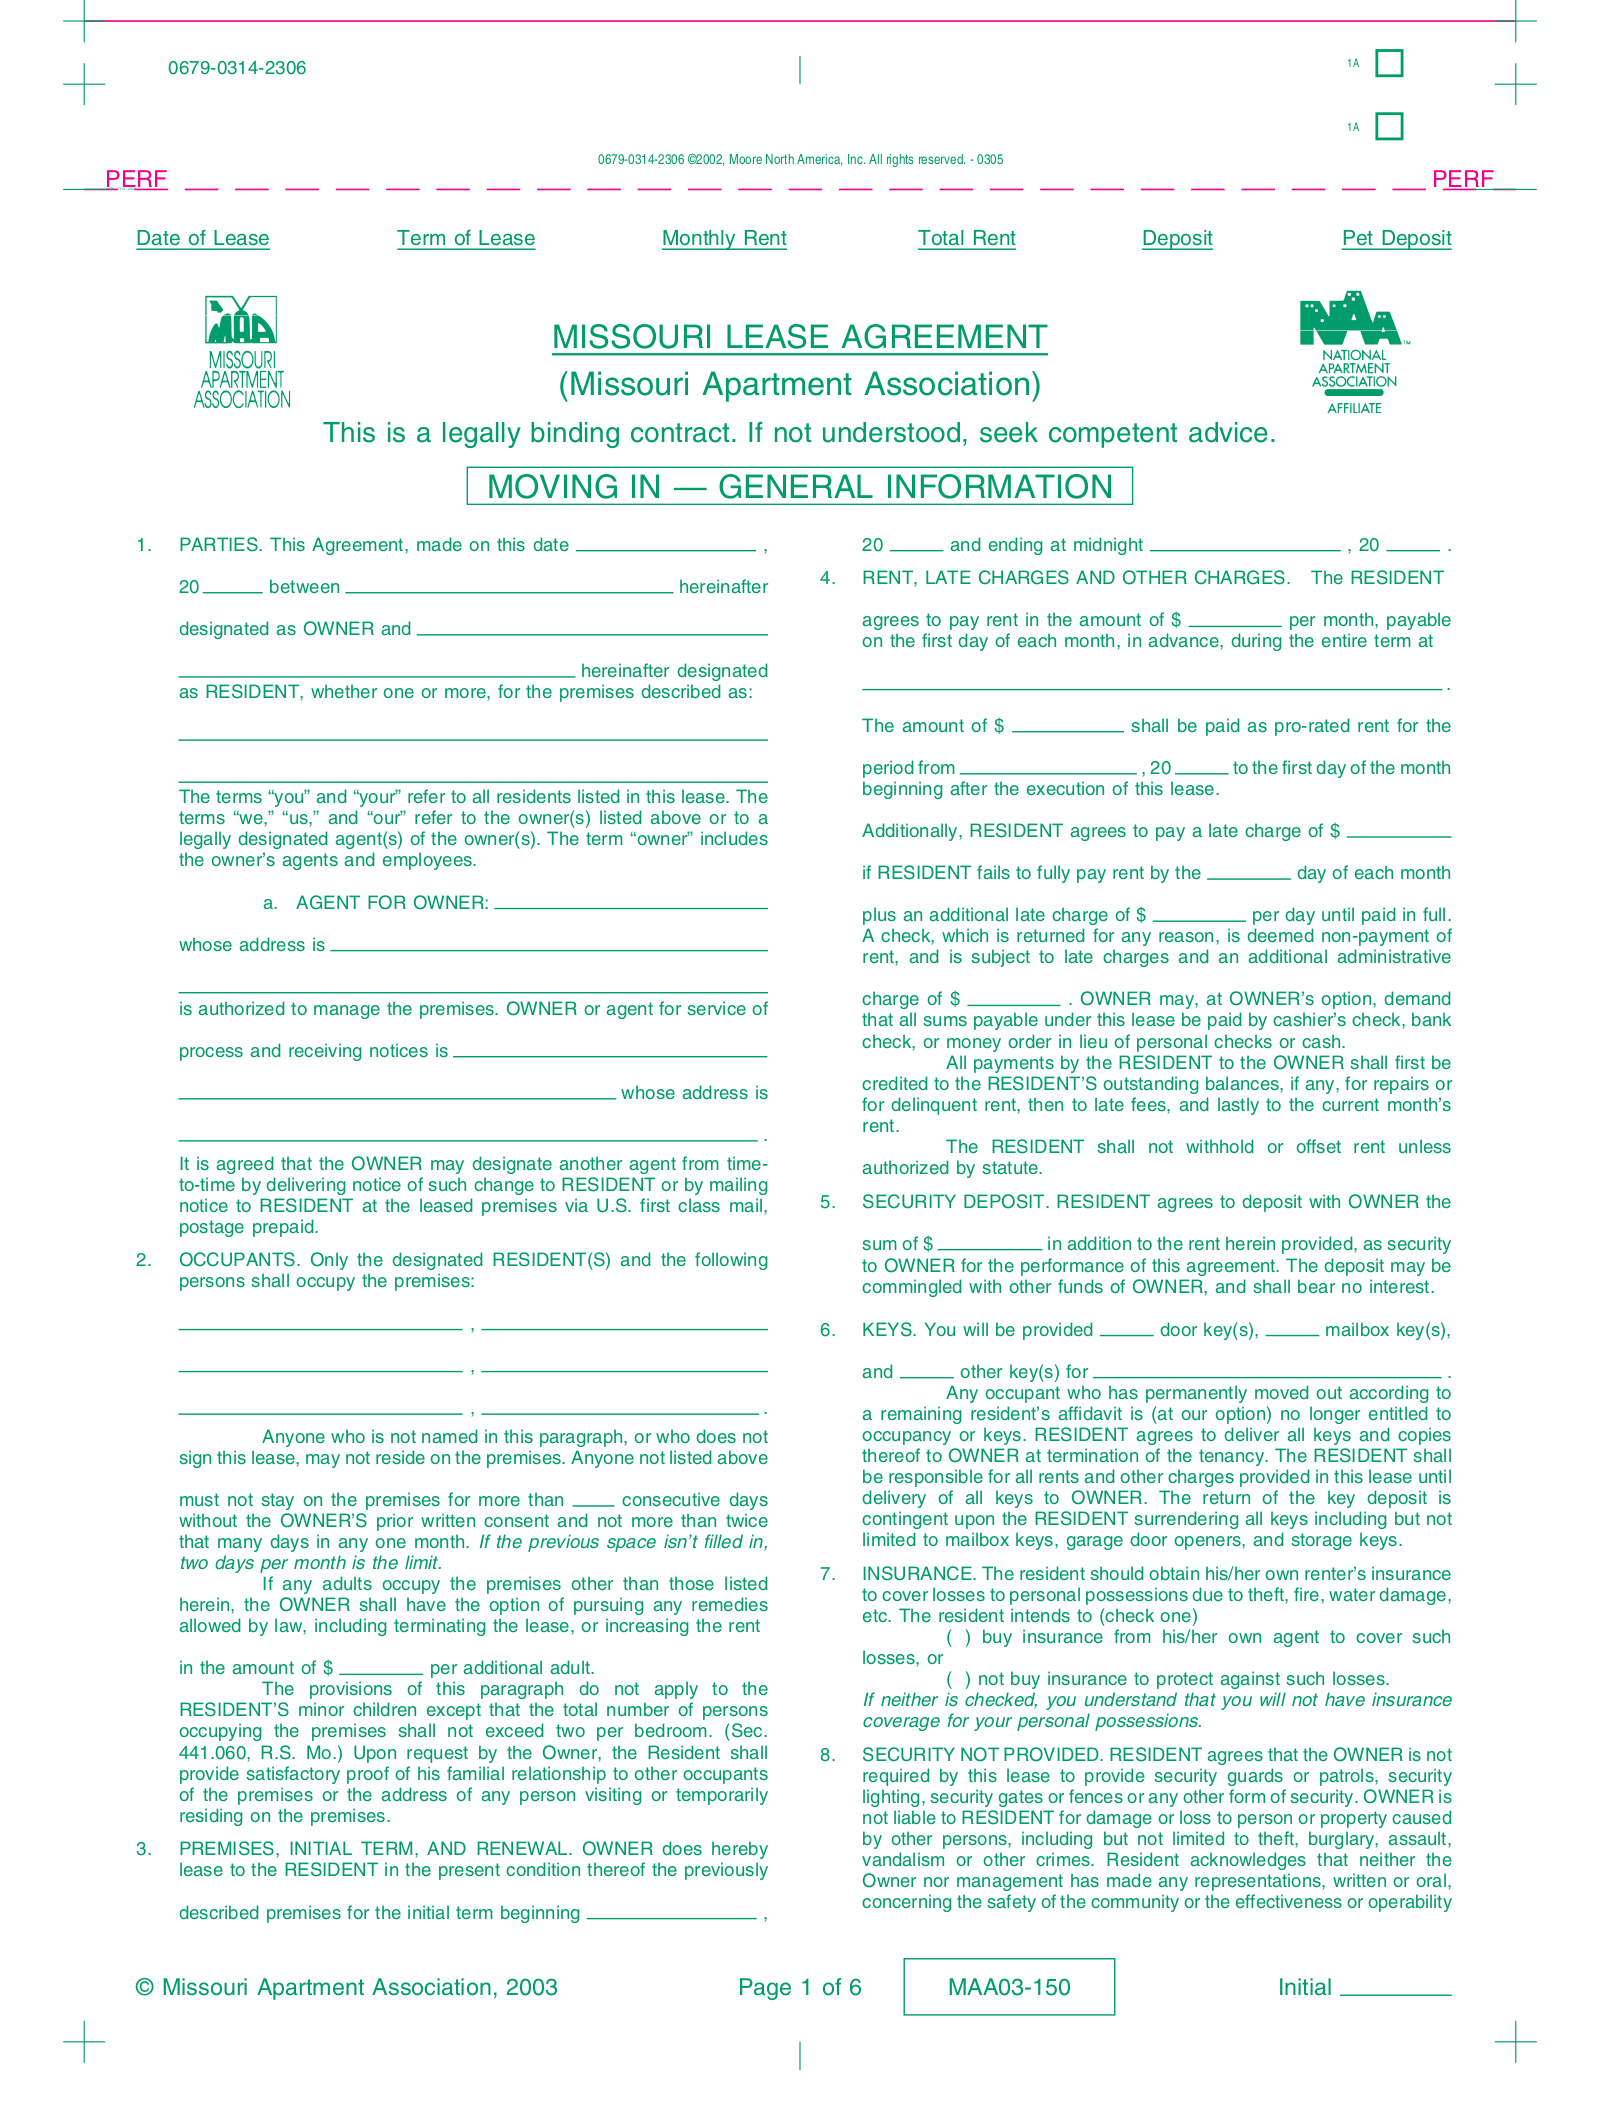 free missouri apartment association residential lease agreement form